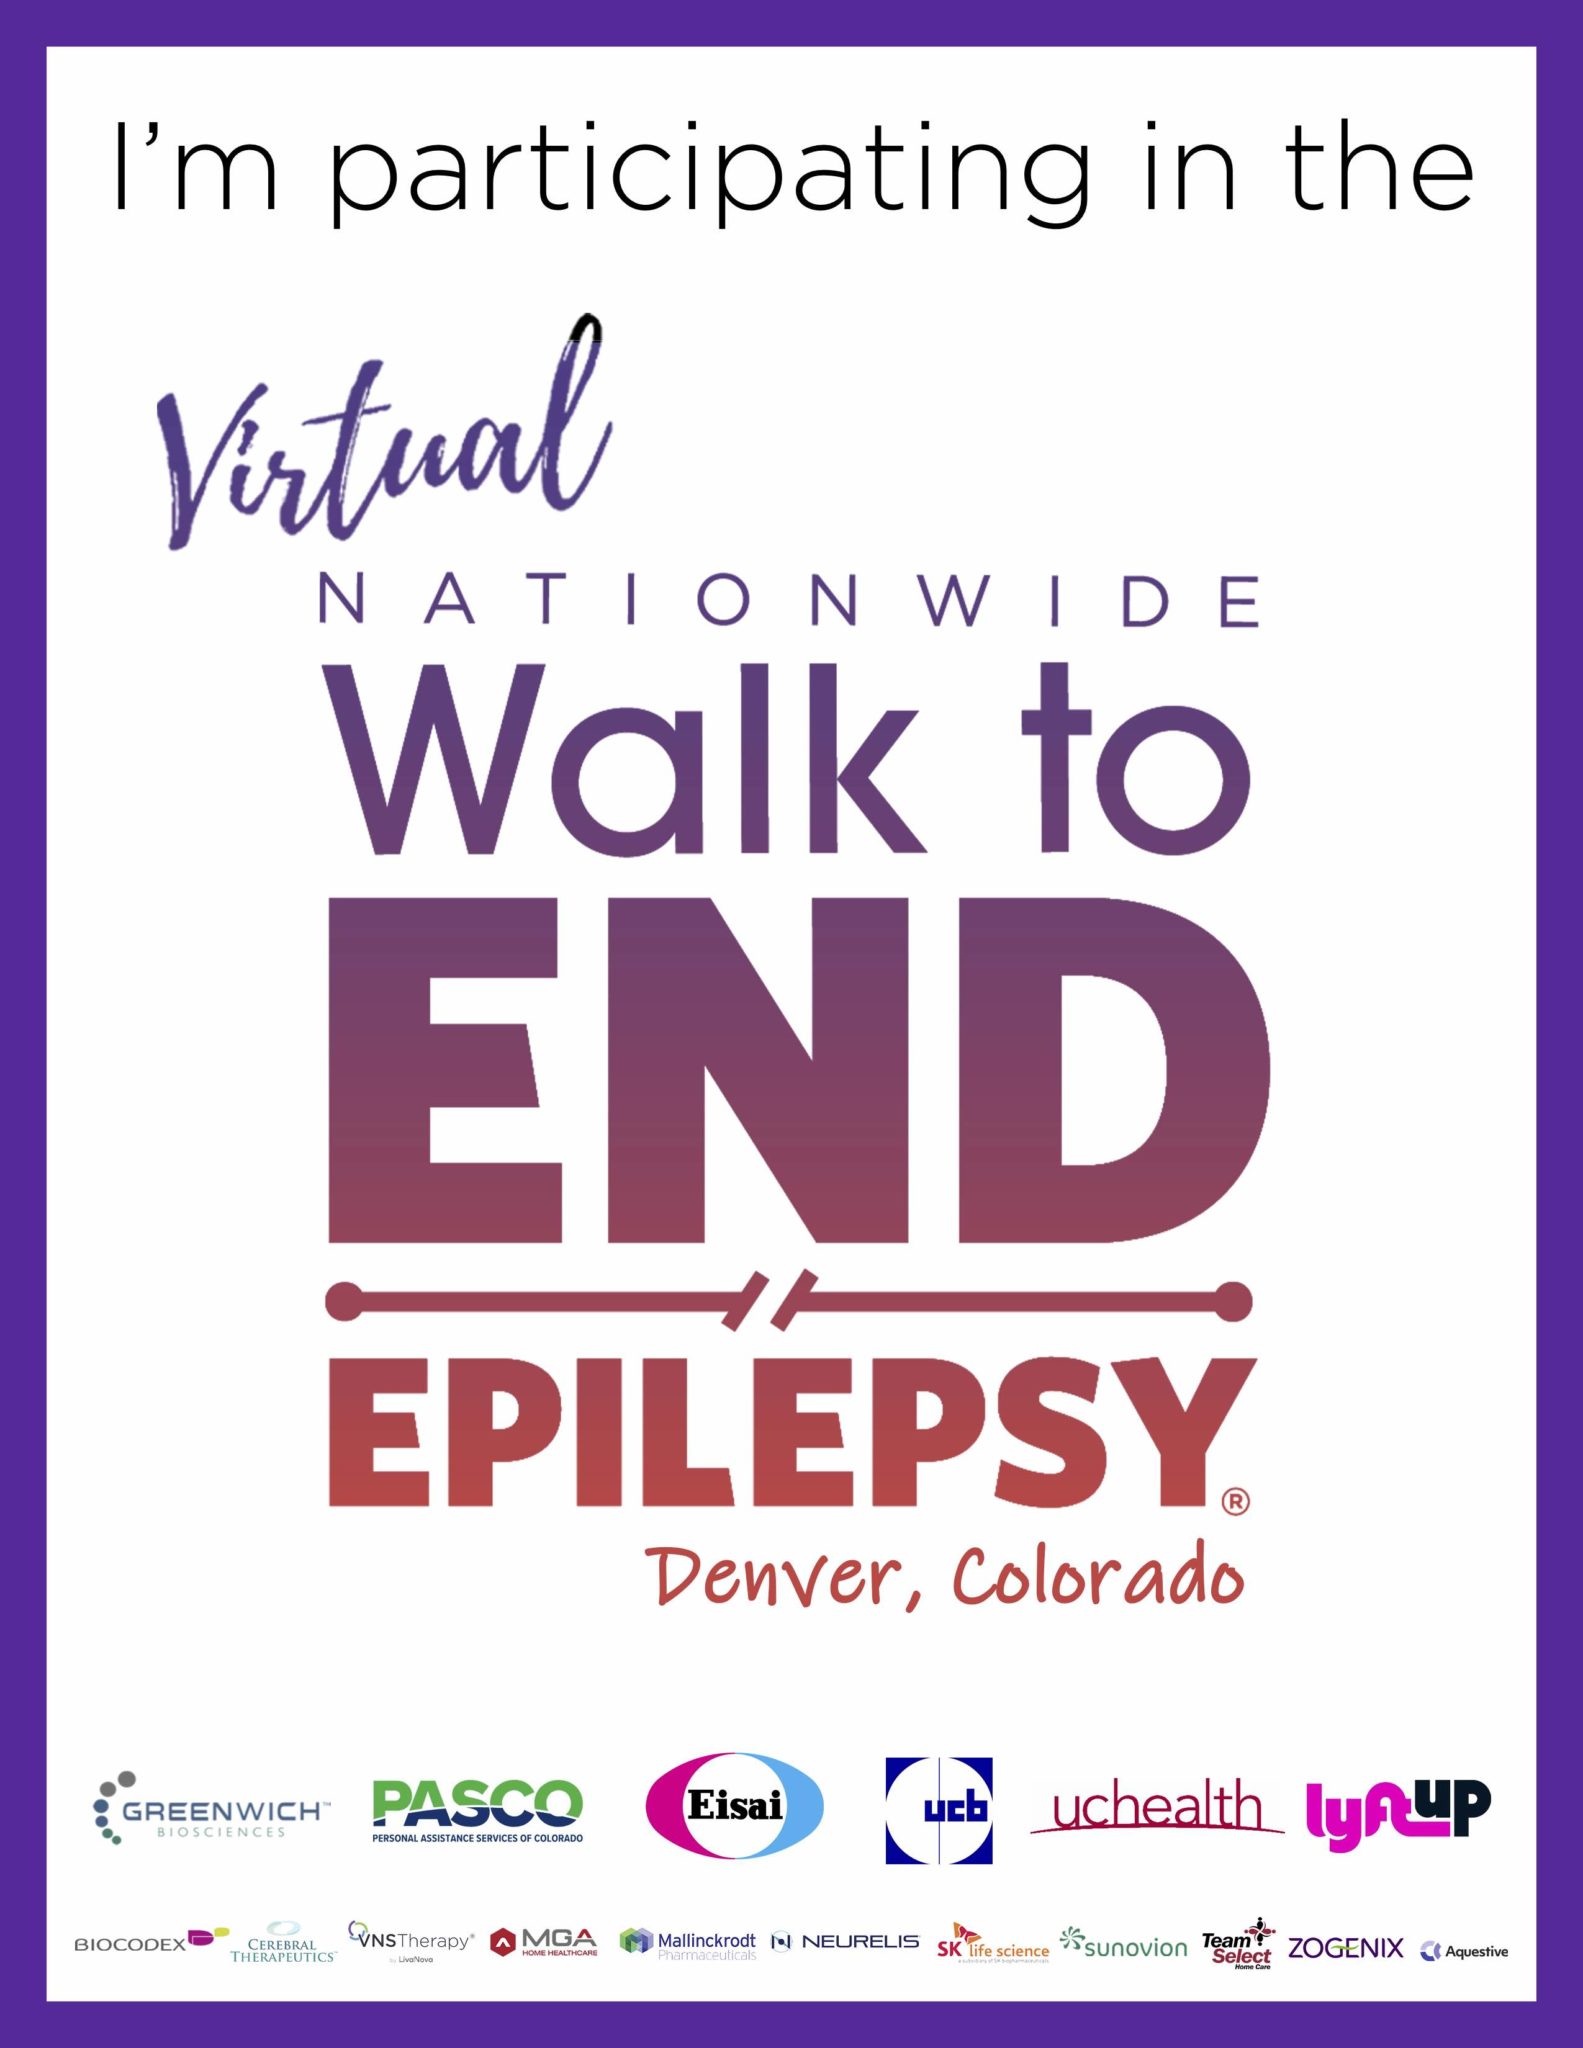 Nationwide Walk to End Epilepsy PASCO Community Events